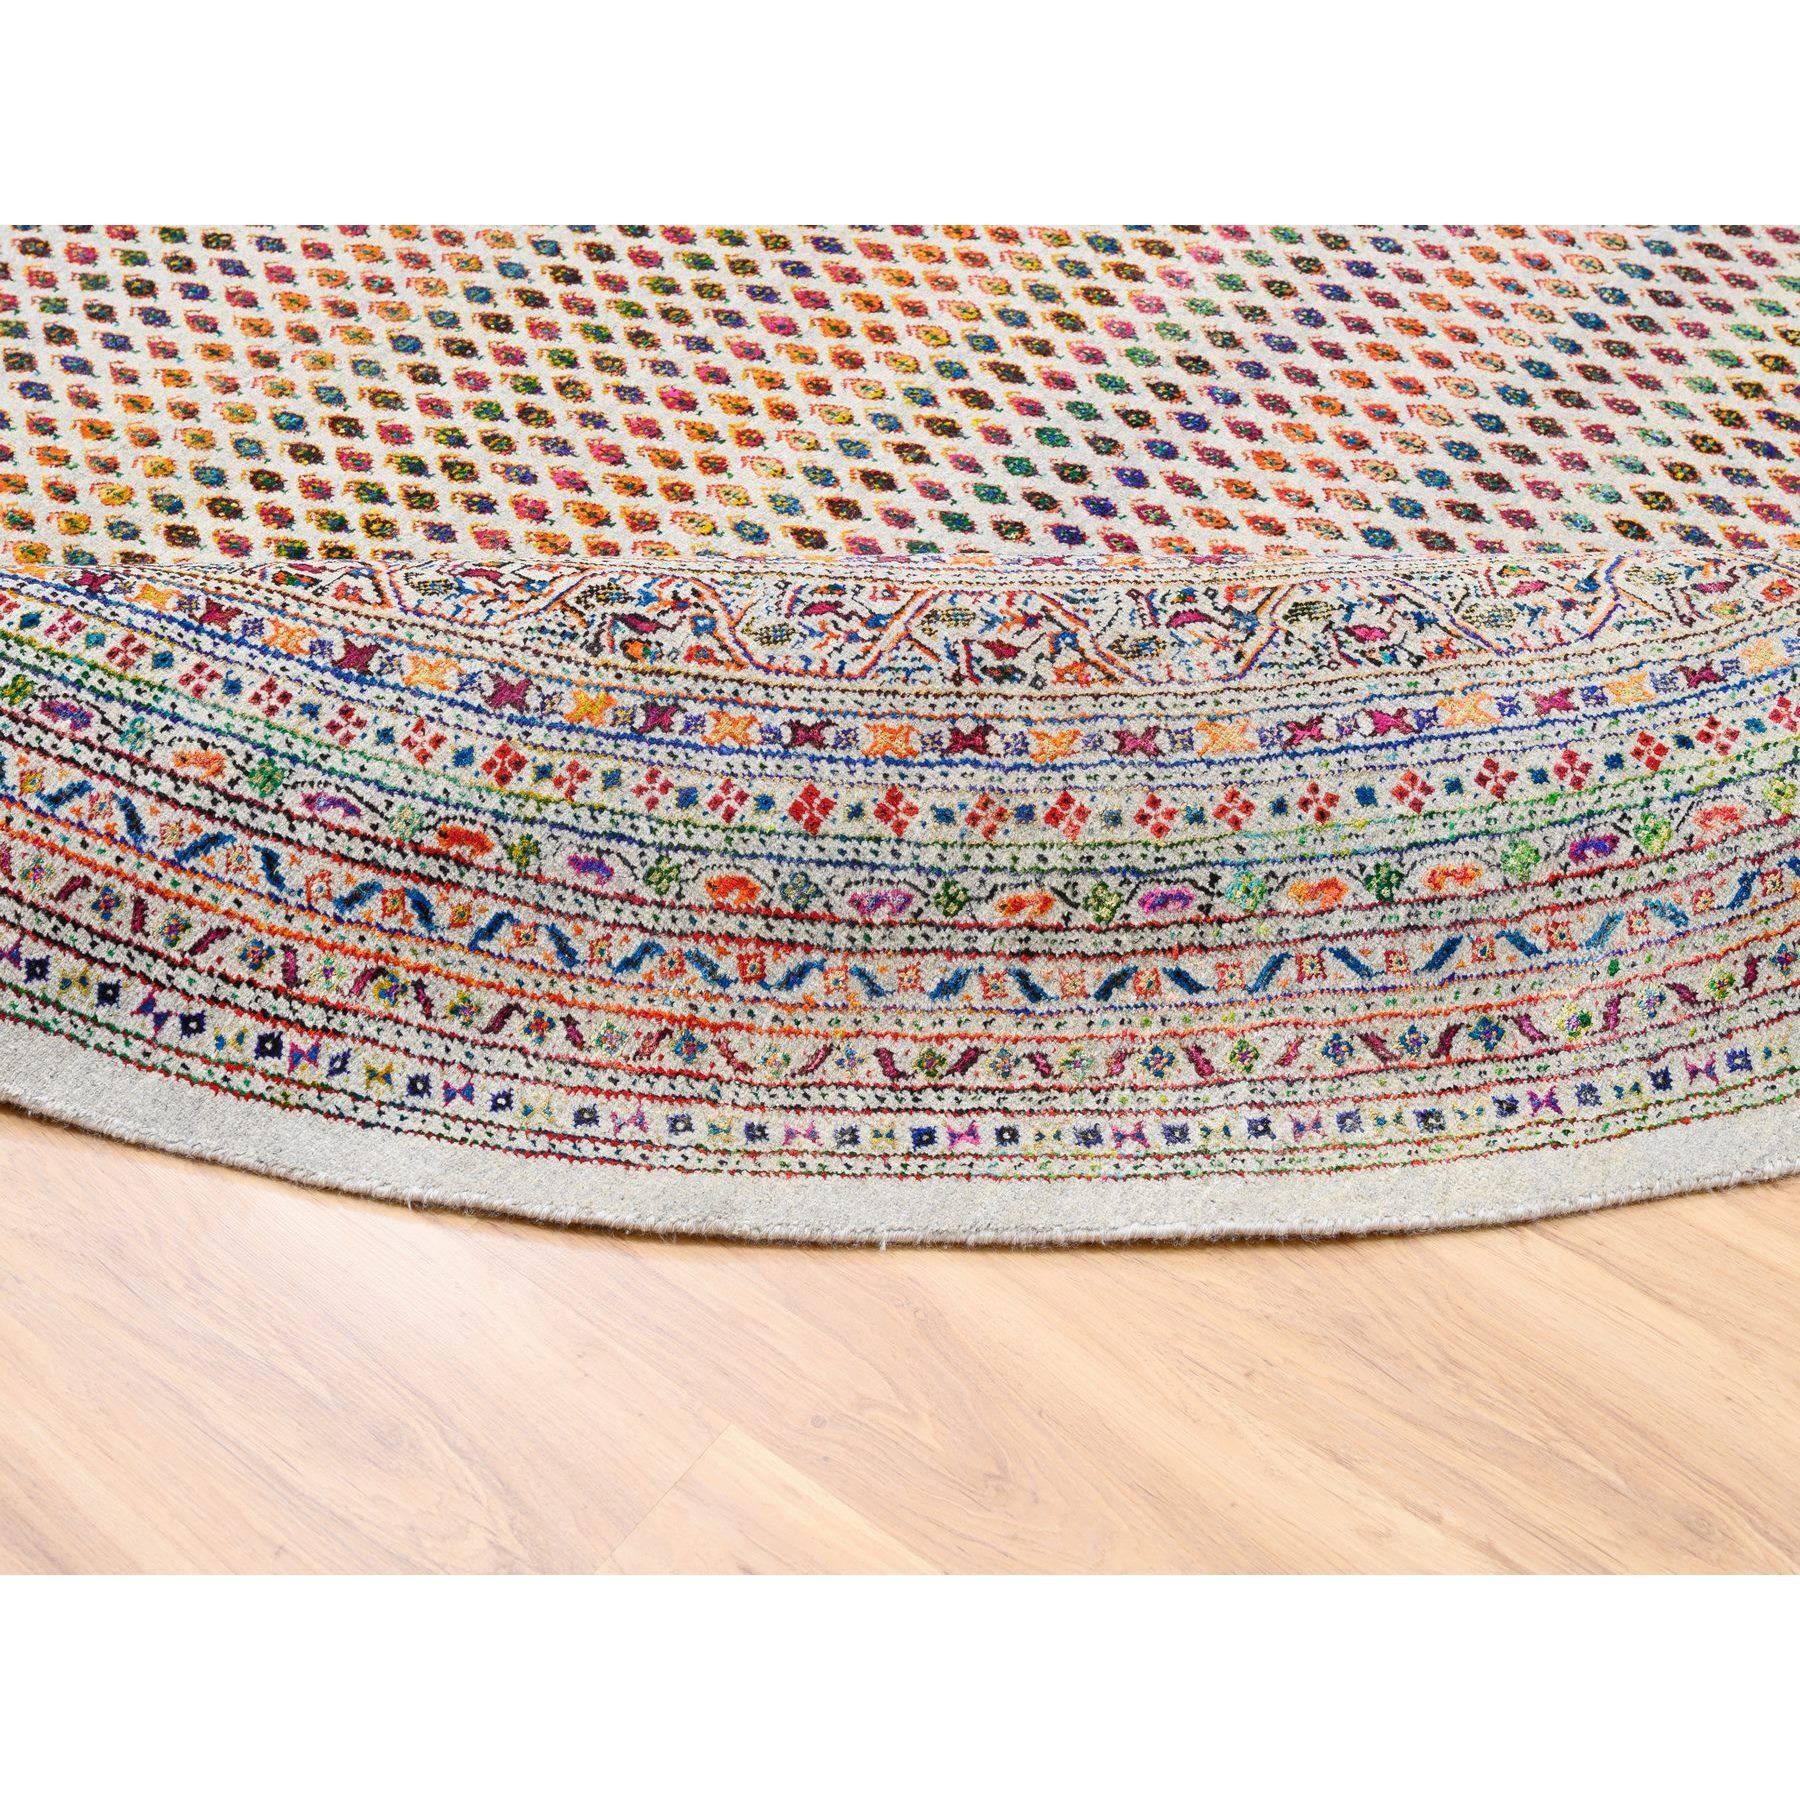 12'x12' Round Colorful Wool And Sari Silk Sarouk Mir Inspired With Multiple Borders Hand Woven Oriental Rug 